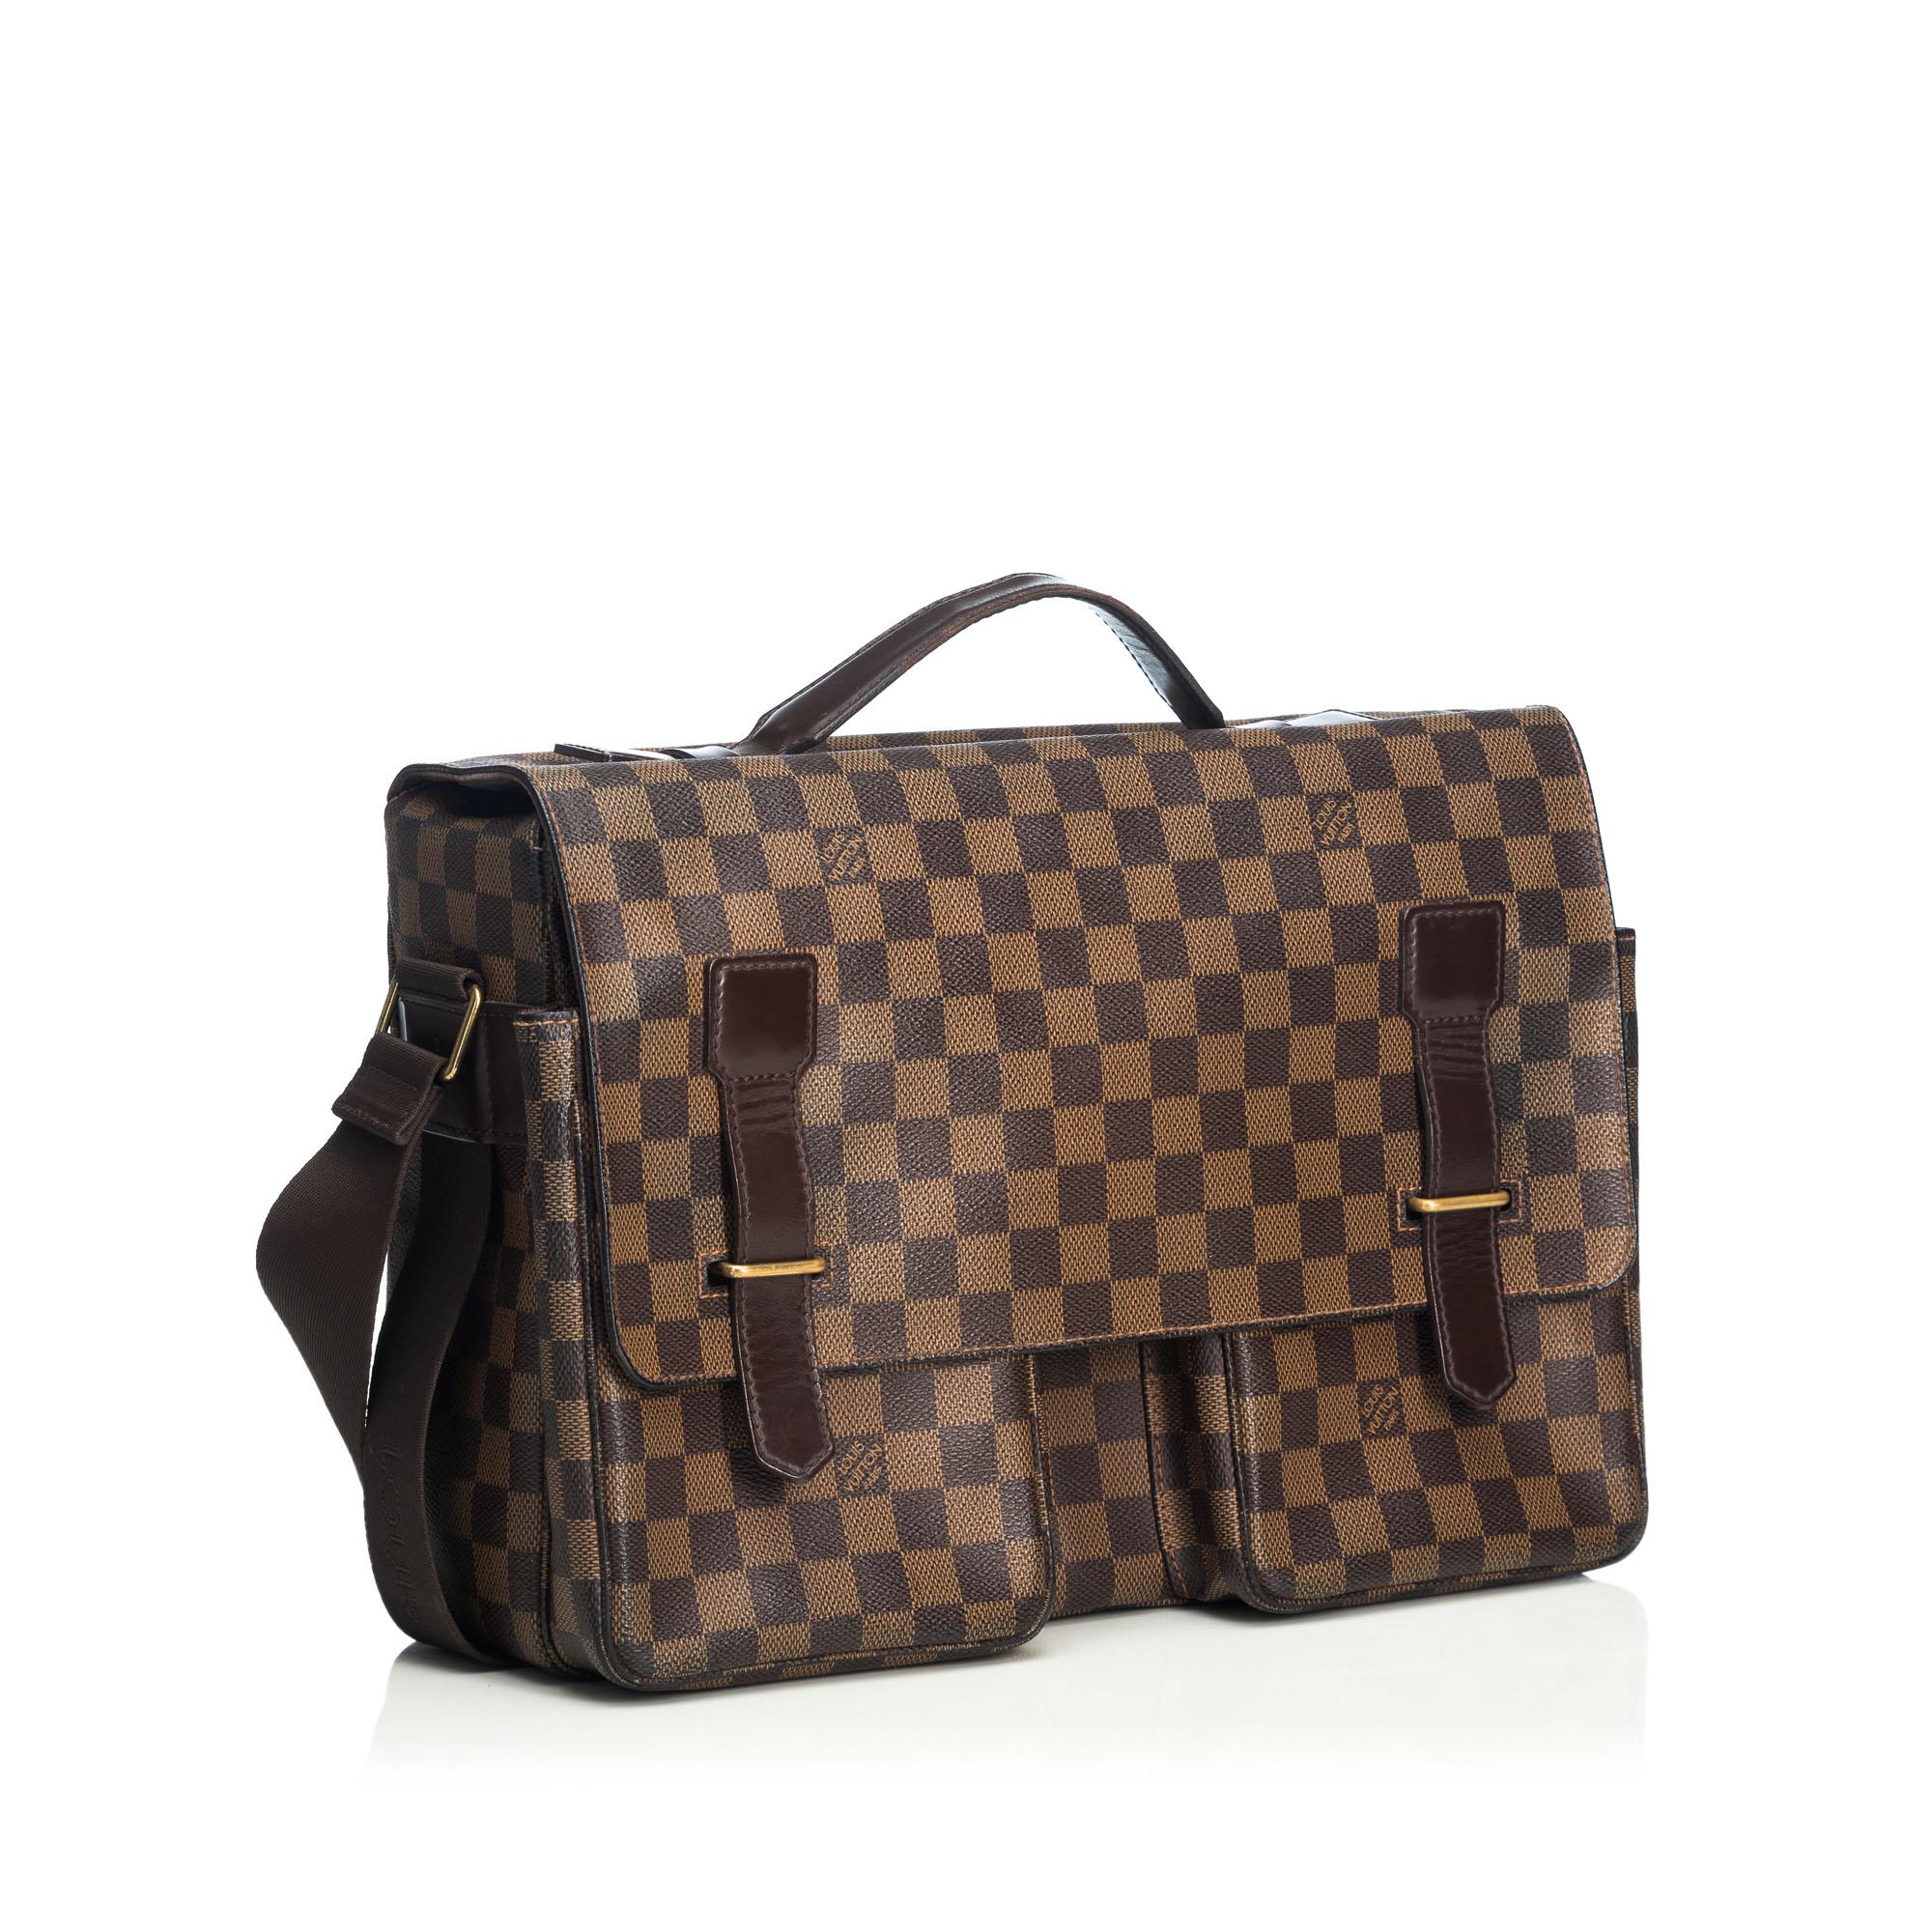 The Broadway features a damier canvas body, exterior open pockets, a flat strap, a front flap, and an interior slip pocket. It carries as B+ condition rating.

Inclusions: 
Box


Louis Vuitton pieces do not come with an authenticity card please